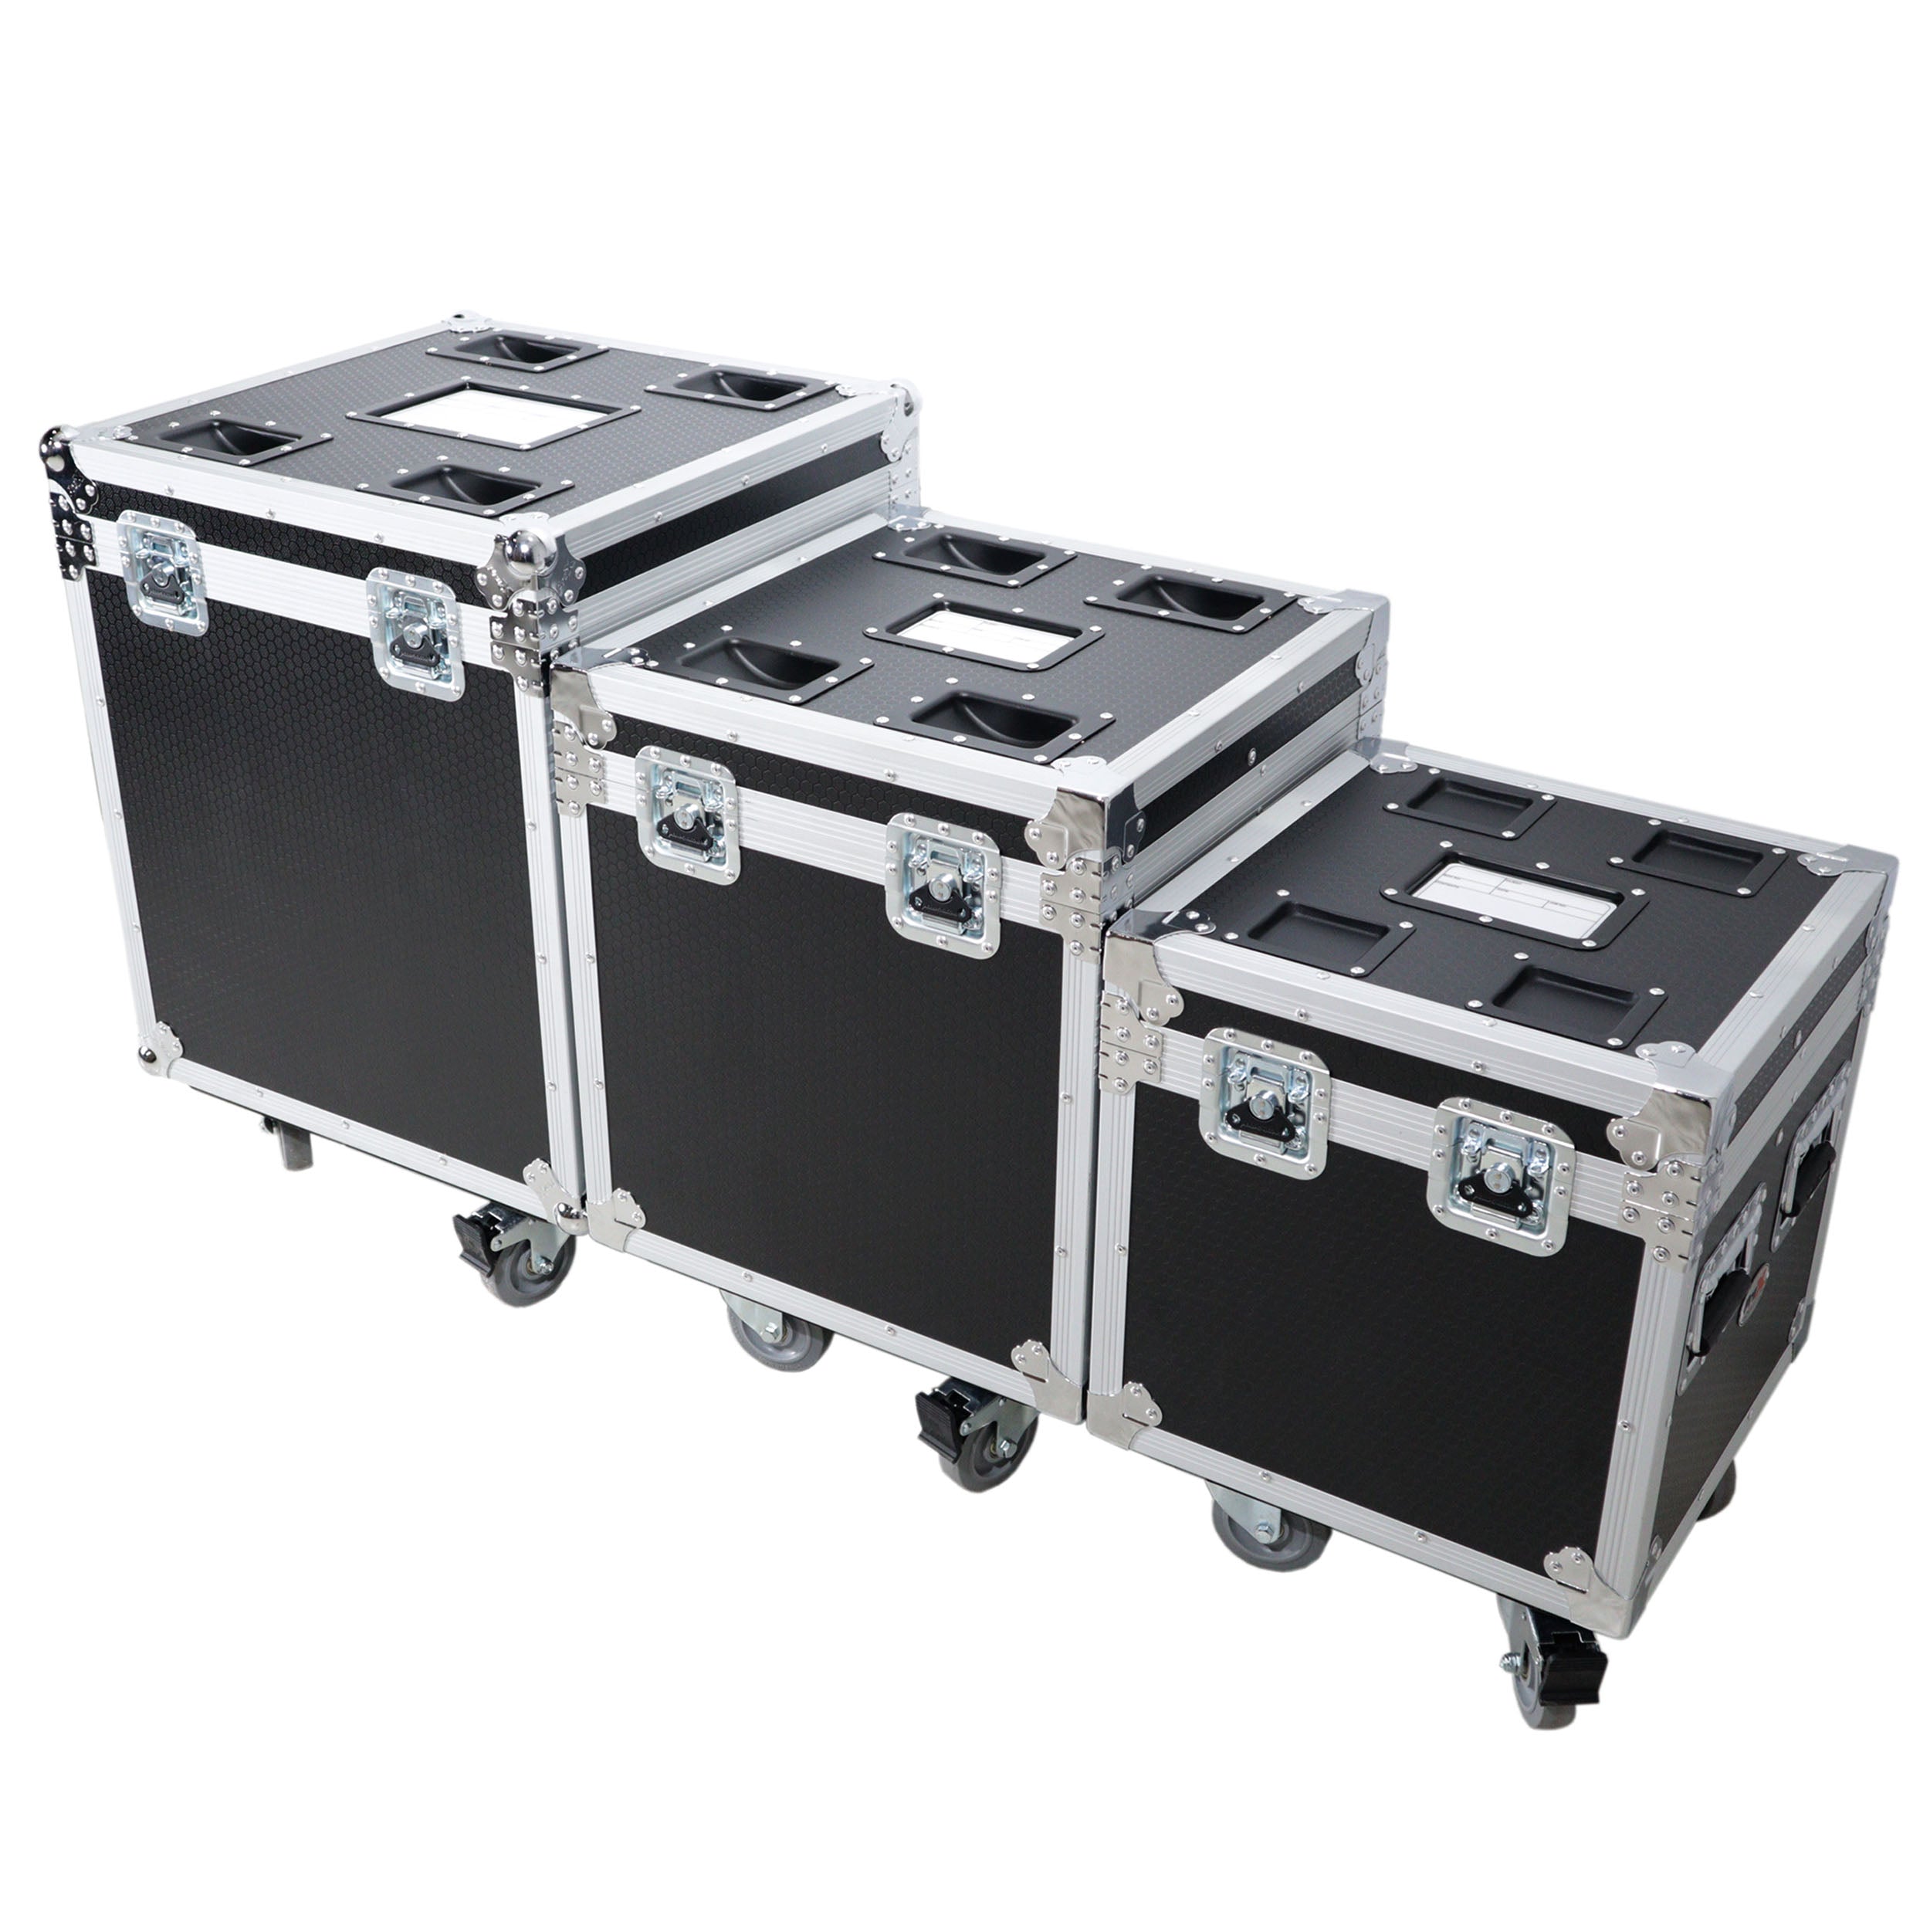 Pro X Package of 3 Utility ATA Flight Travel Storage Road Case – Includes 1-Large 1-Medium 1-Small Size with 4" Casters XS-UTL49PKG3